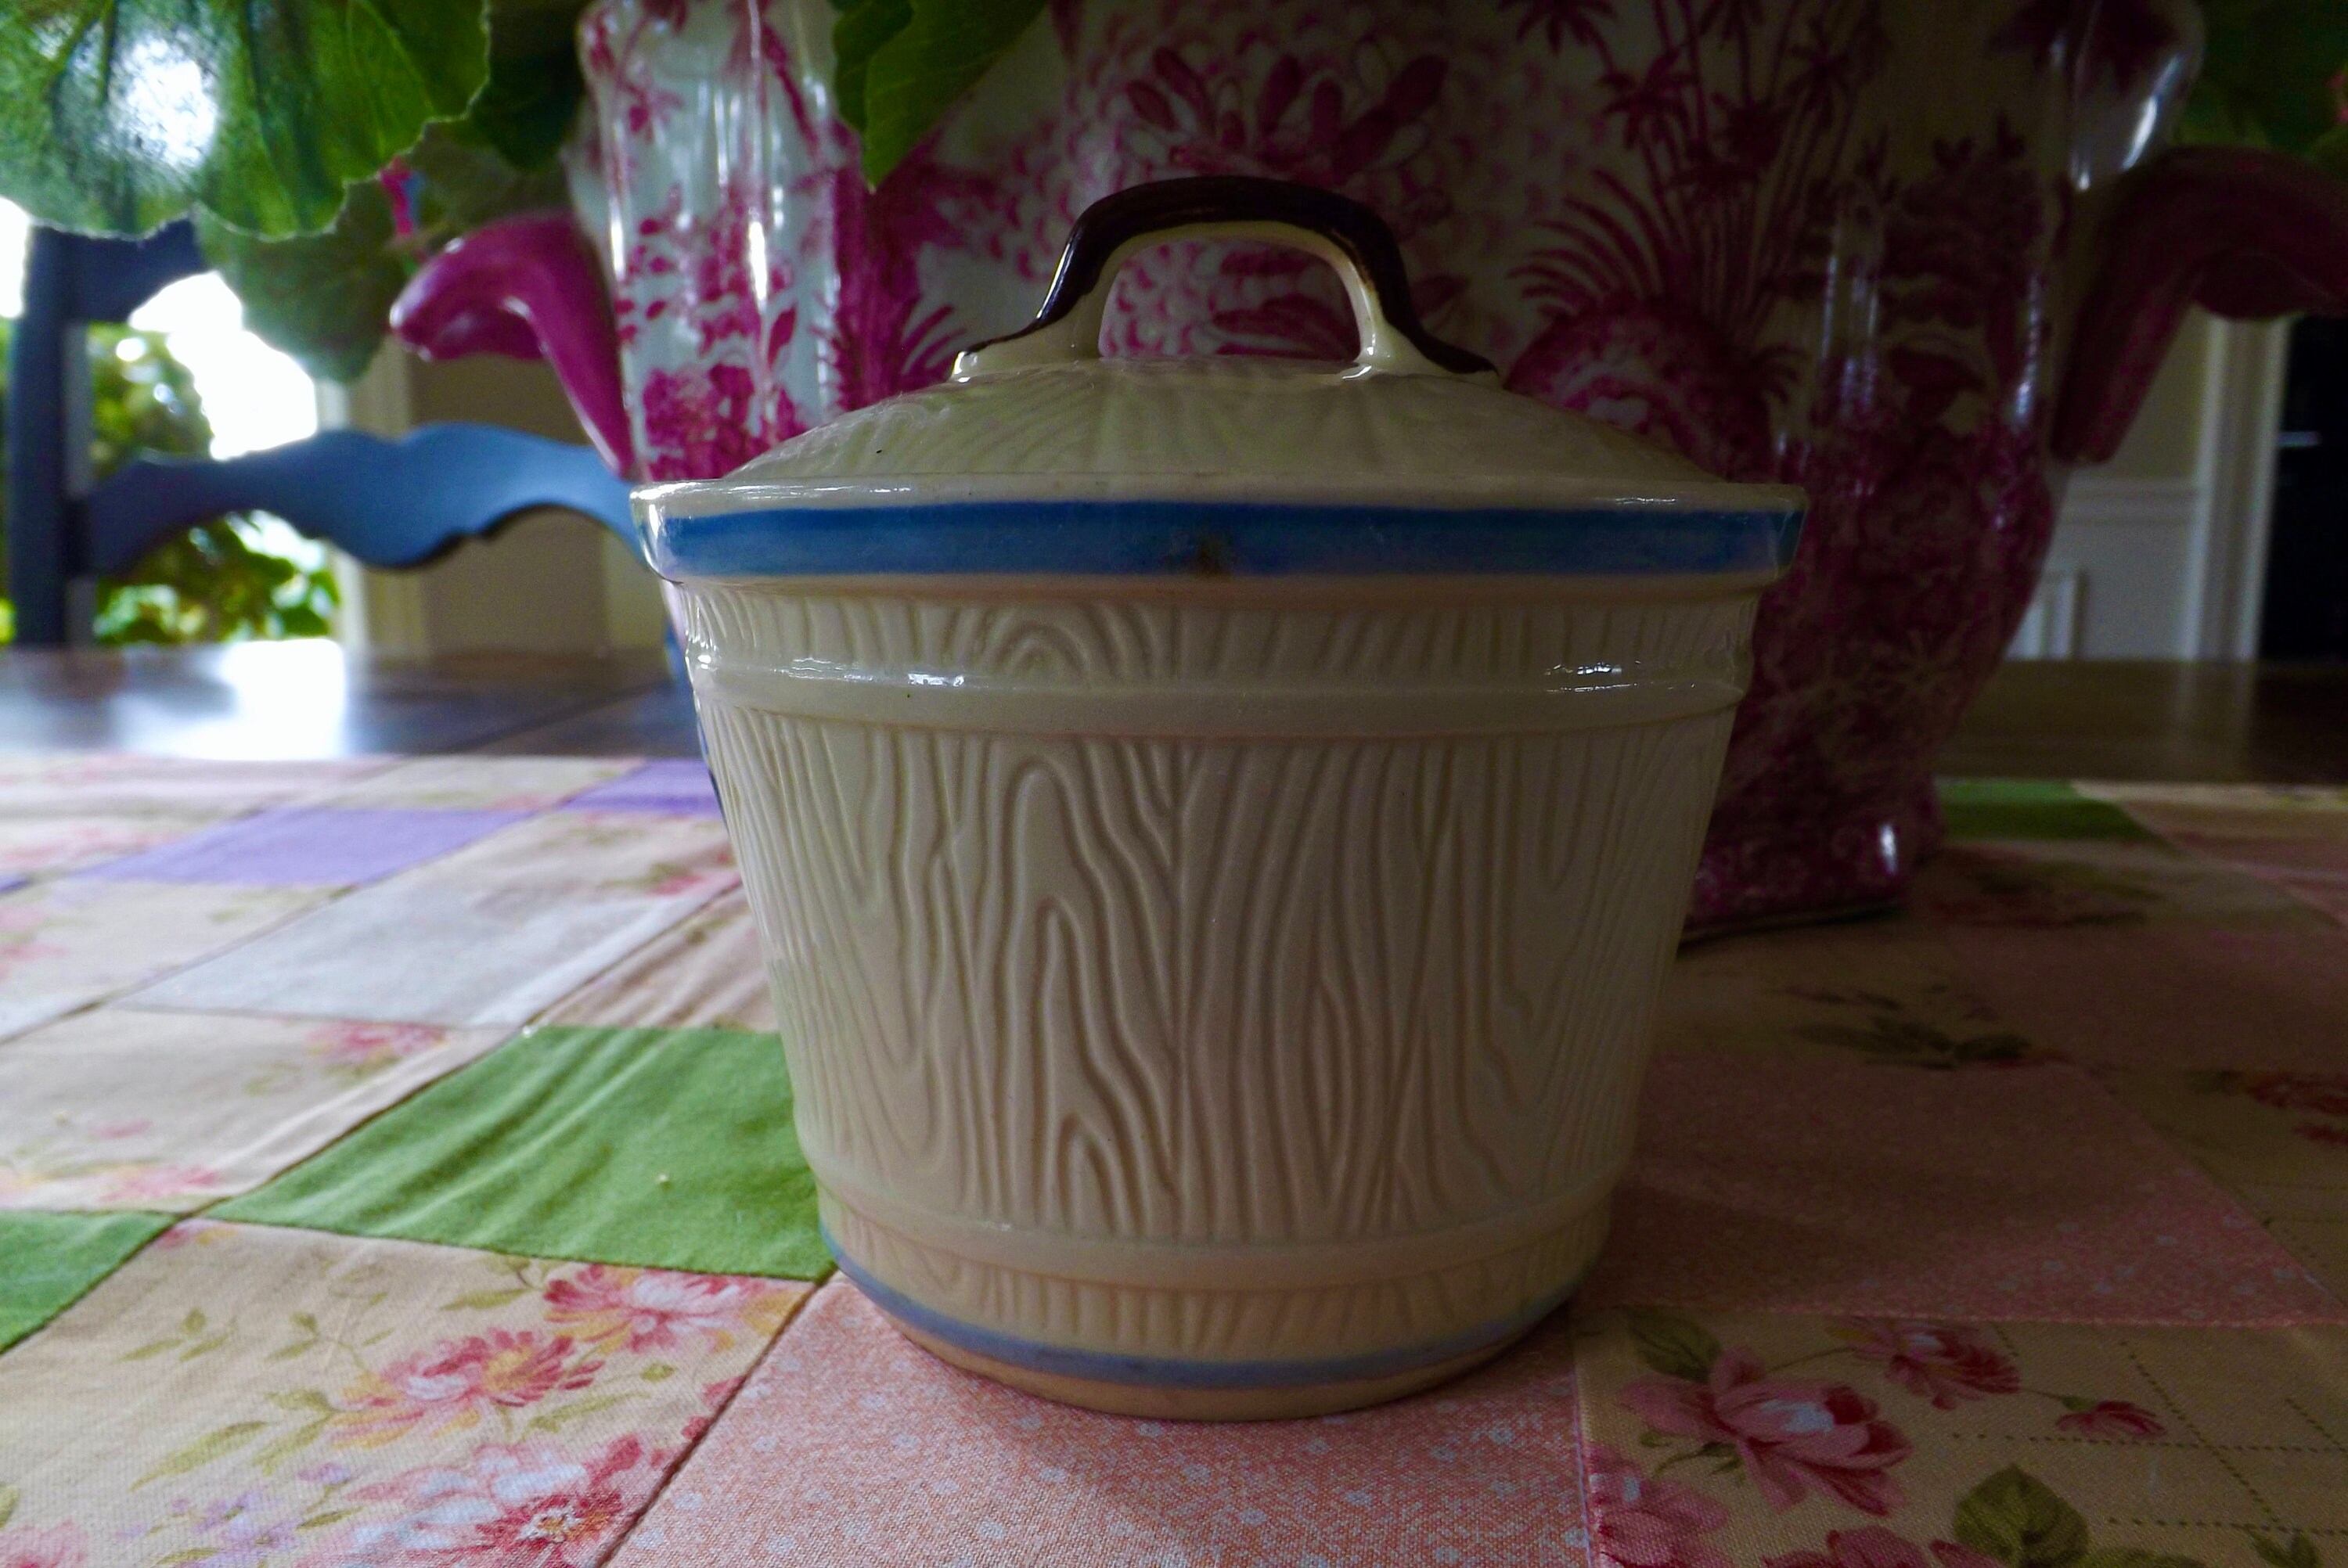 Green and Black French Butter Crock With Patterned Lid, Rustic